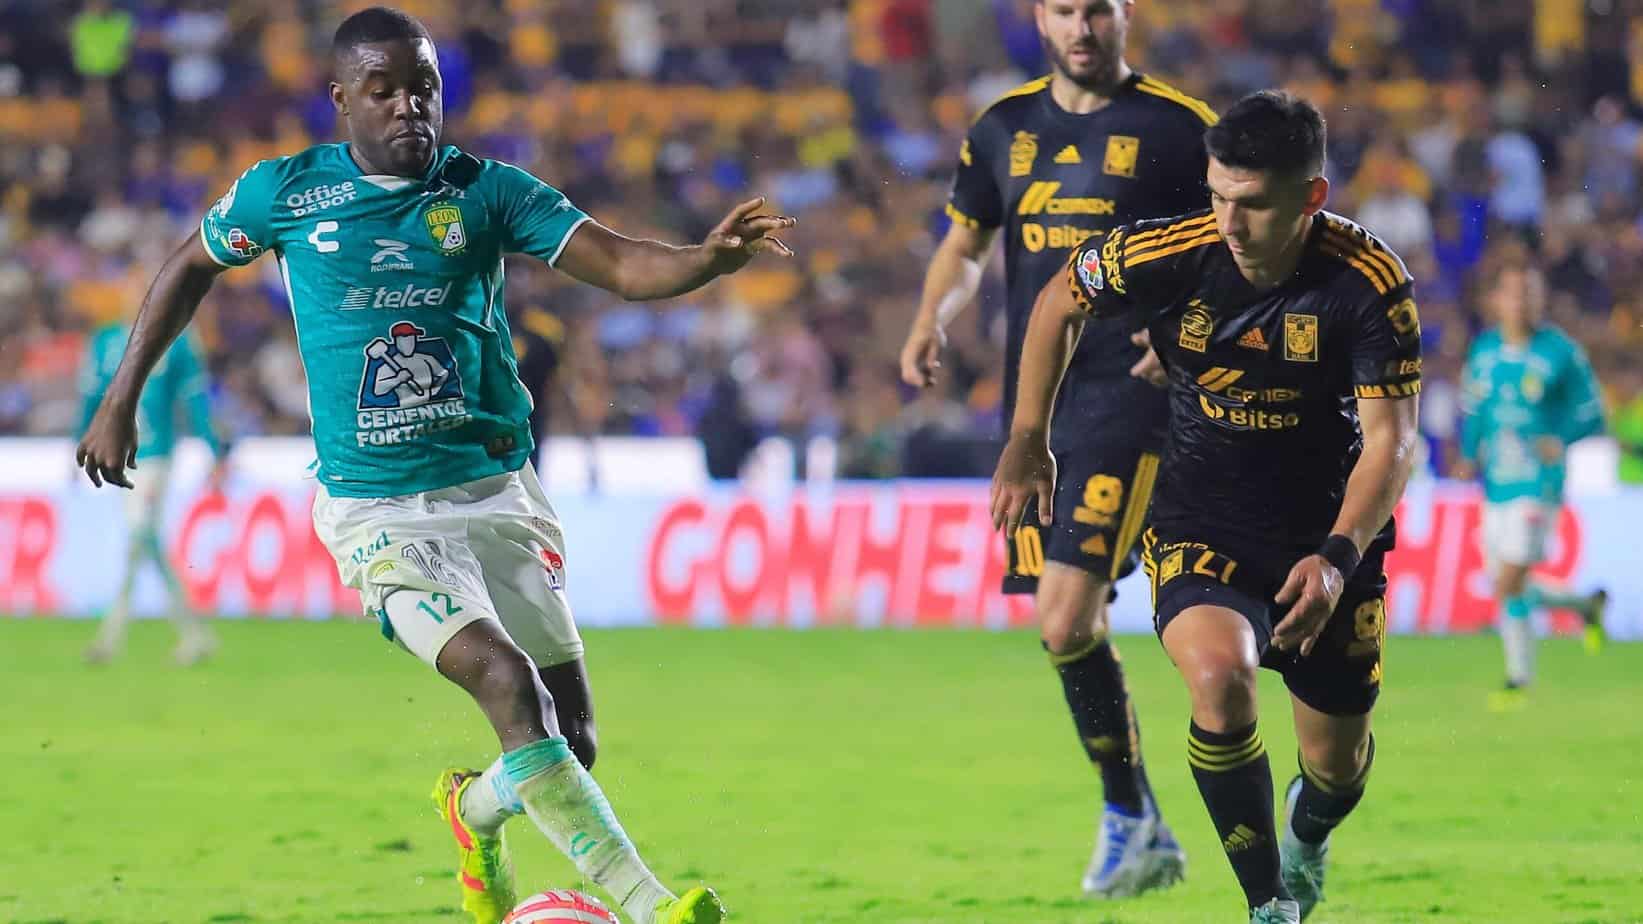 León vs. Tigres Preview and Free Pick